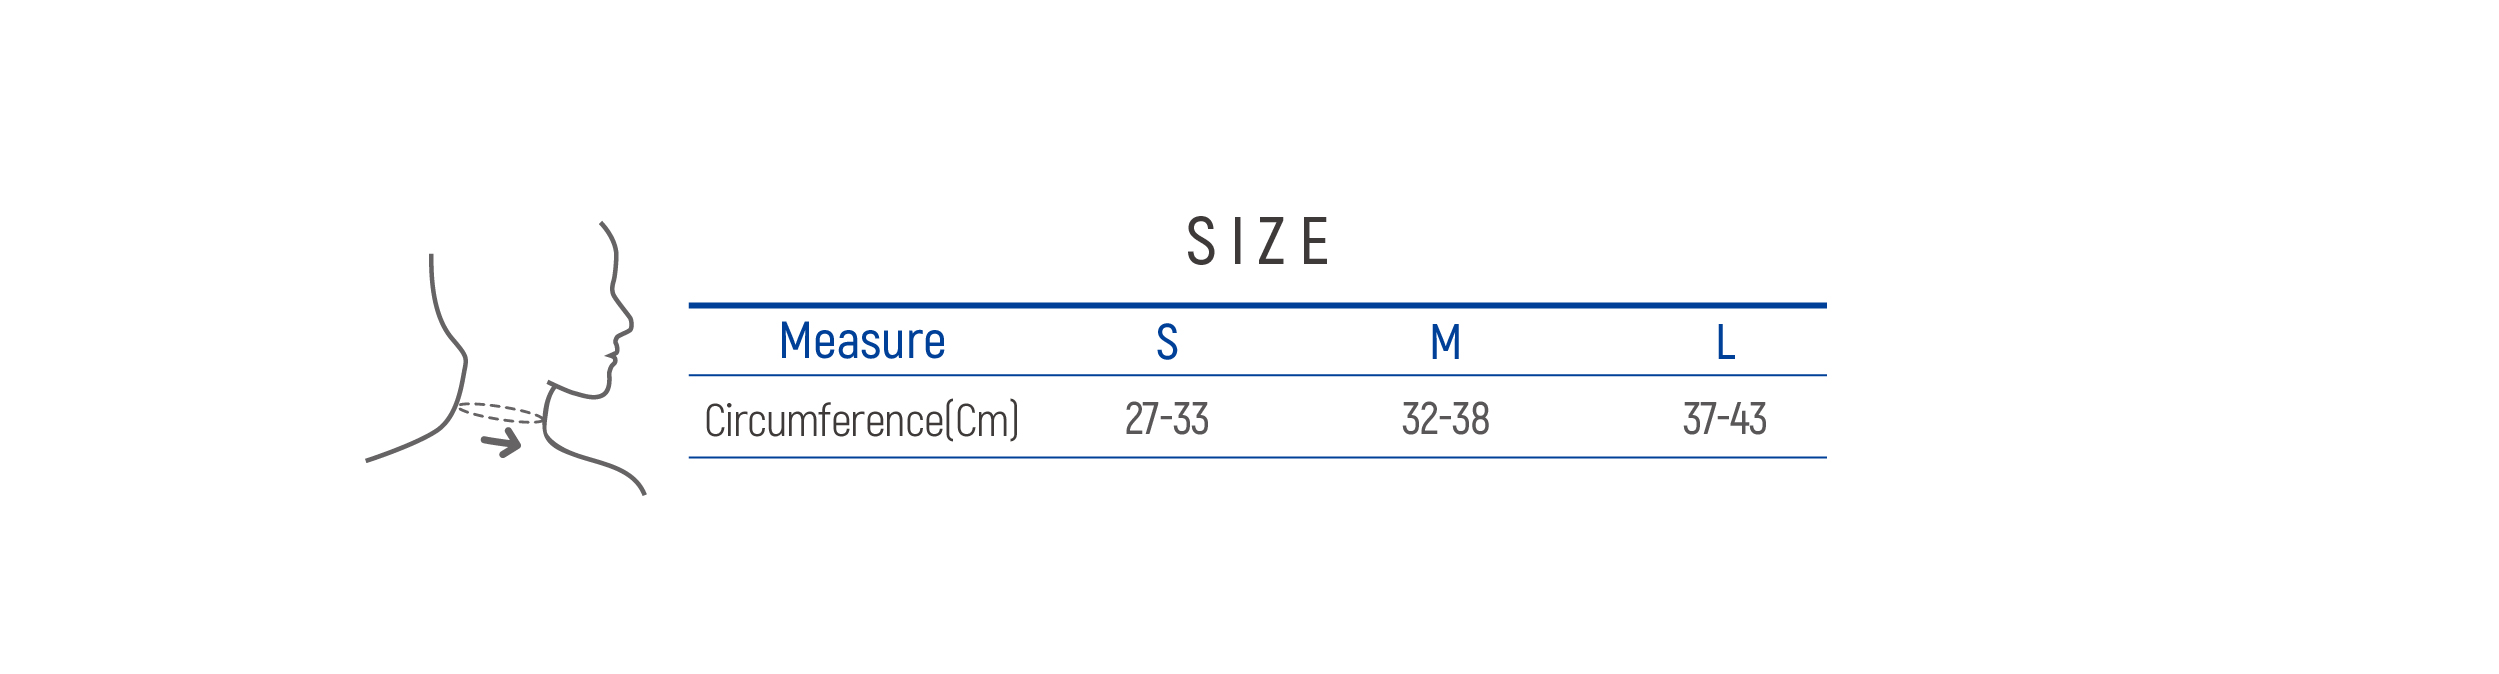 DR-122-1 Size table image